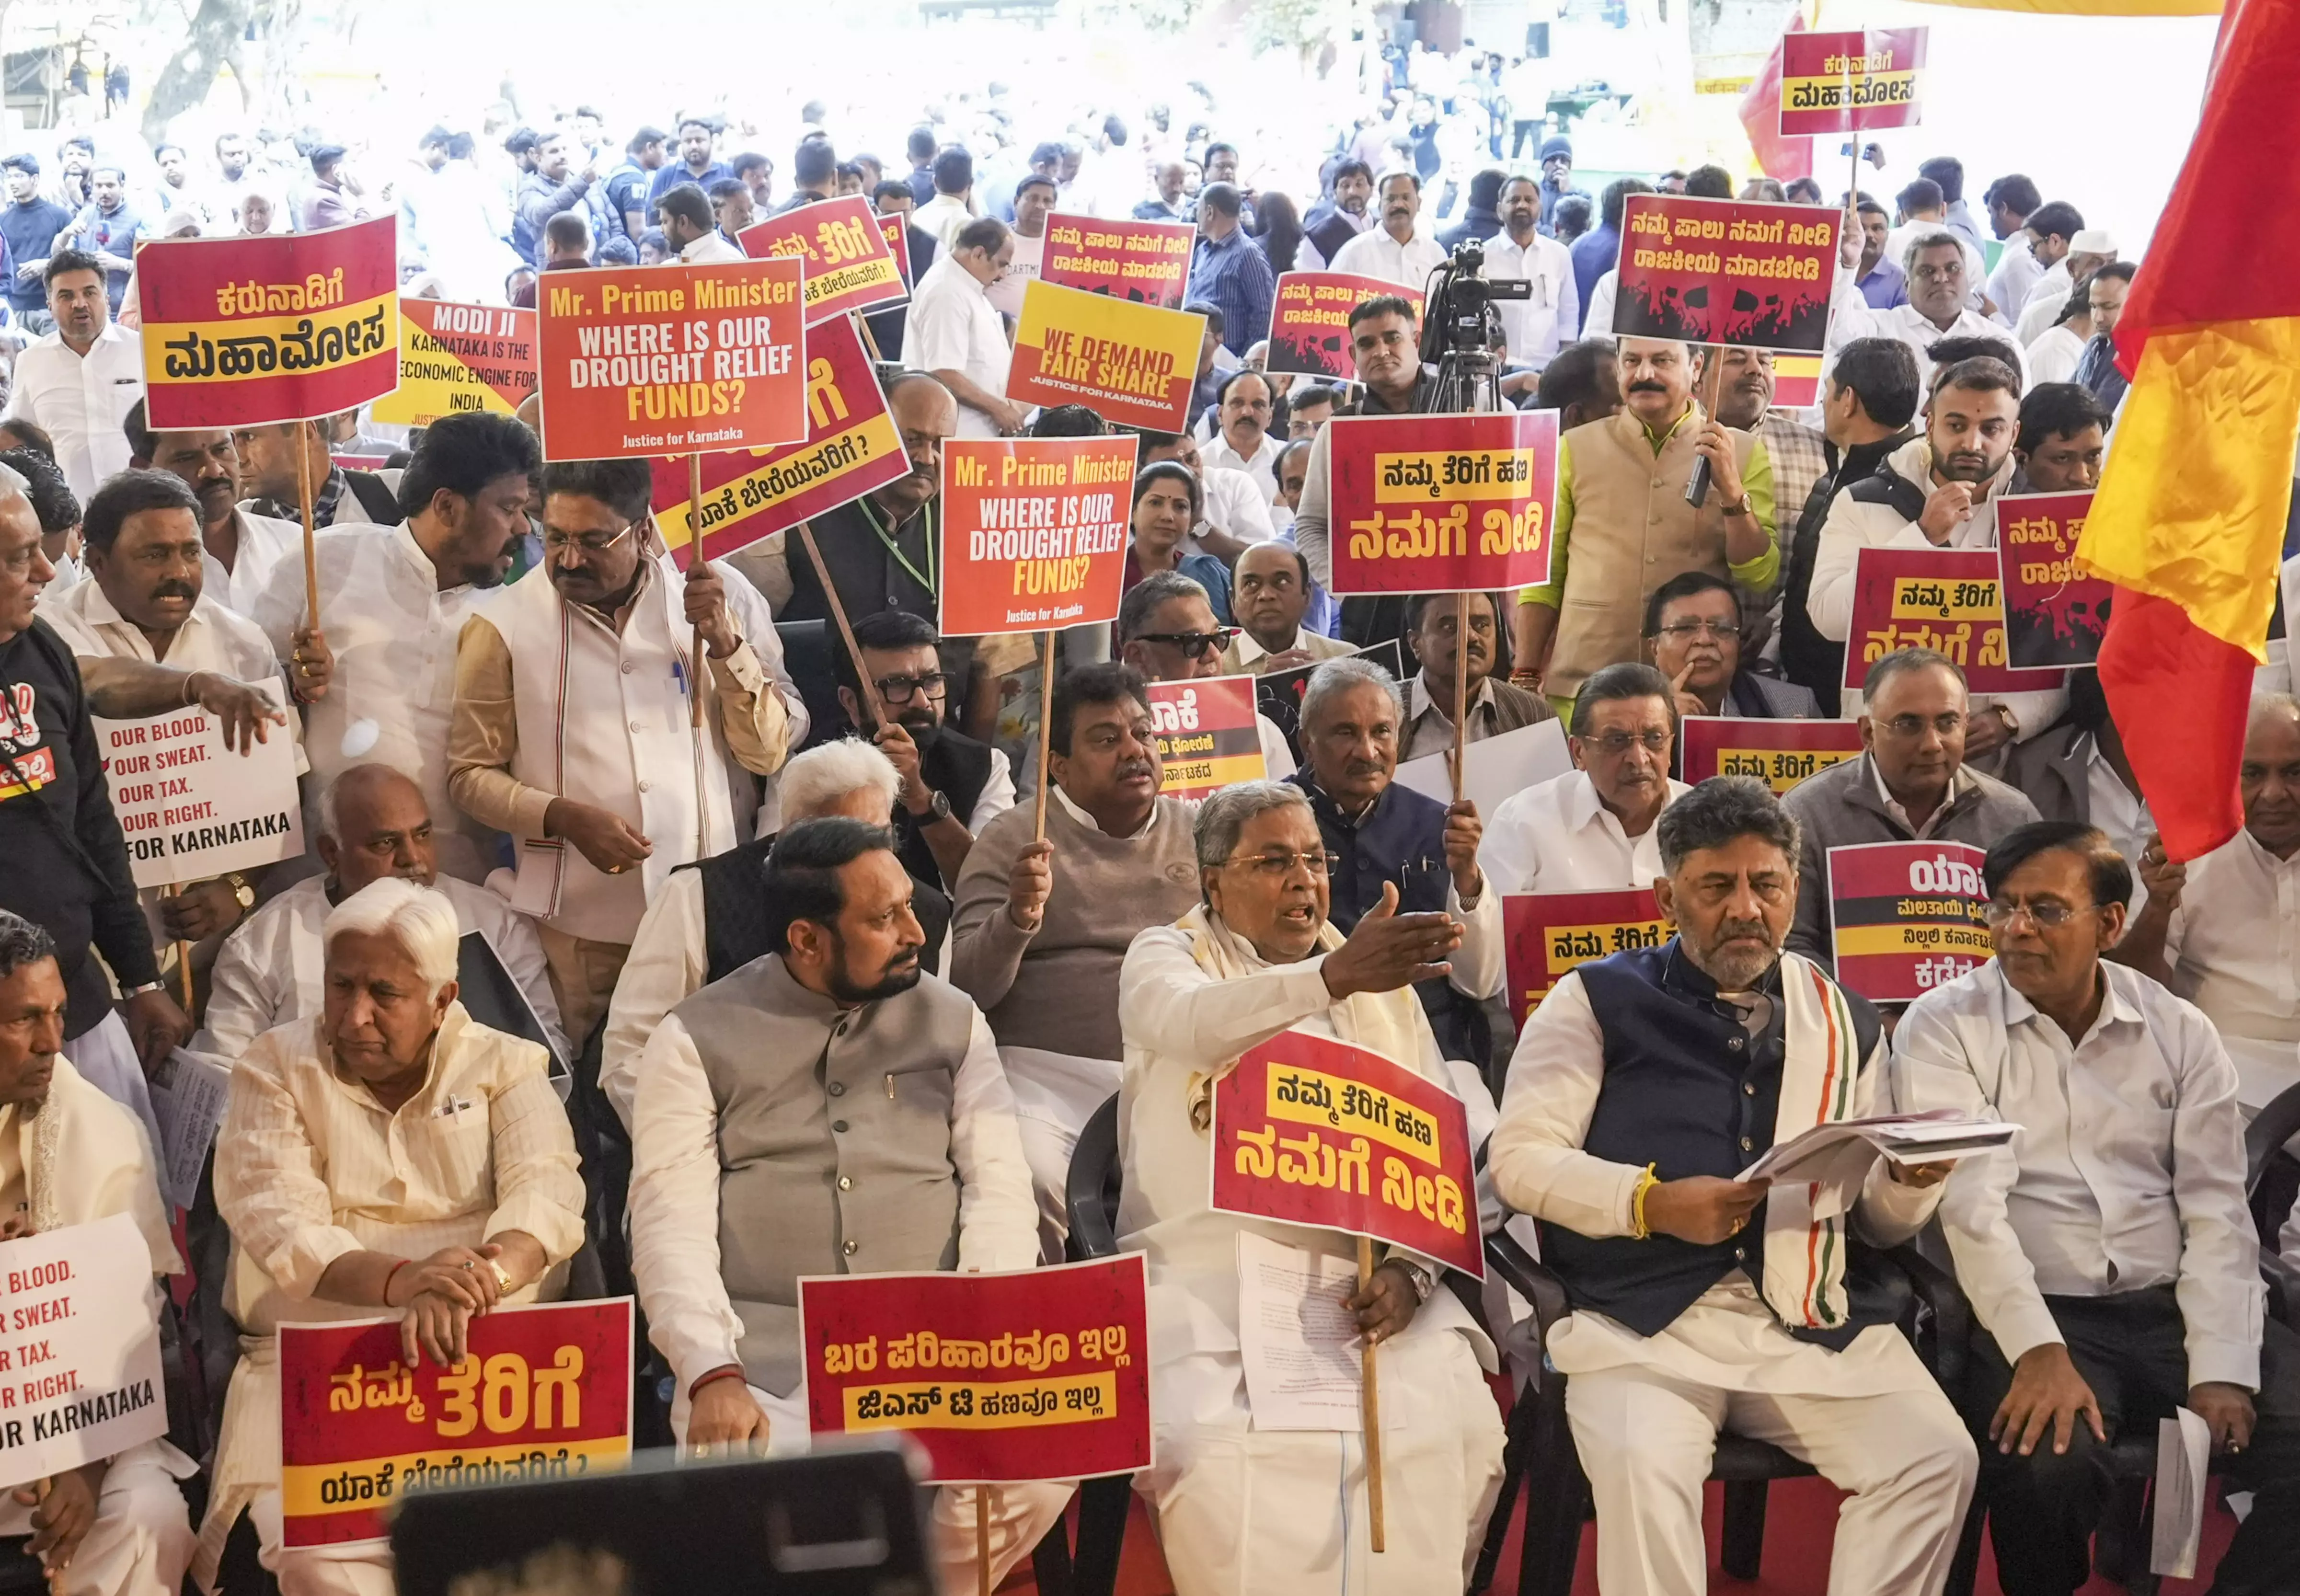 As 4 South states protest against Centre’s fiscal ‘unfairness’, know what the grouses are